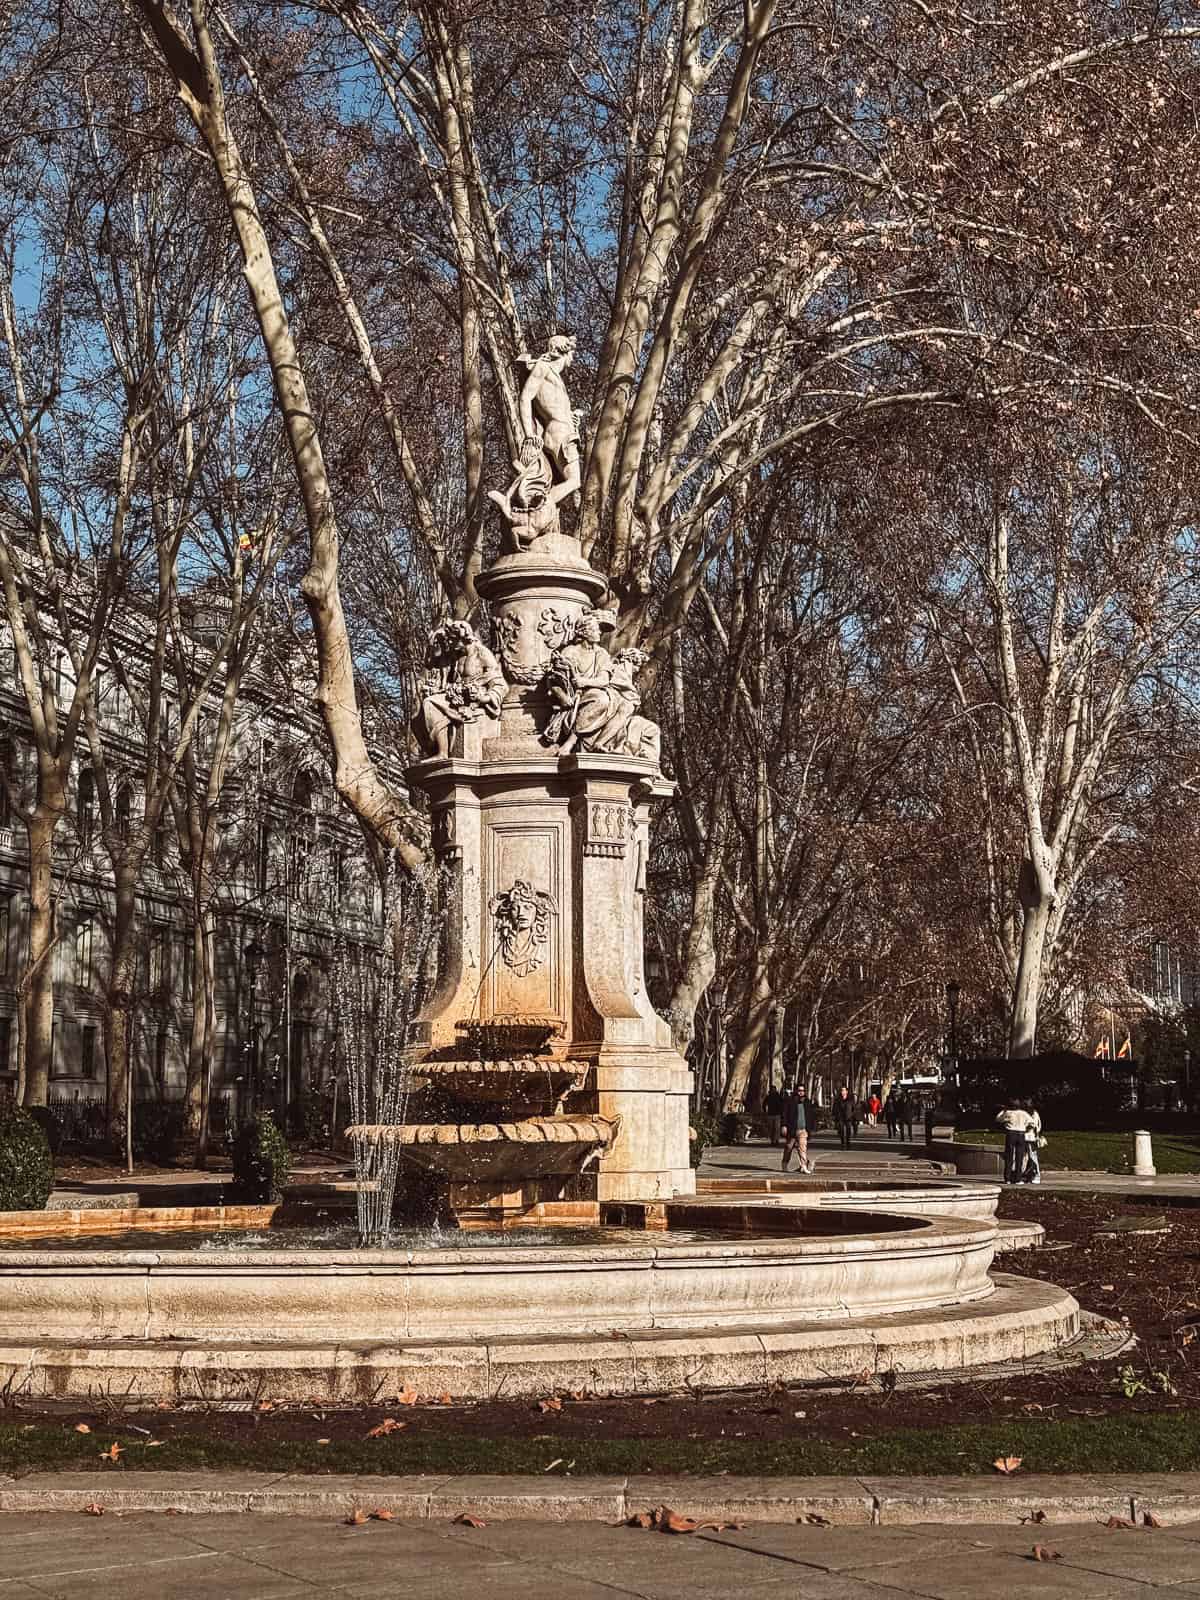 An ornate stone fountain adorned with sculptures, centered among bare-branched trees under a blue sky, with water gently cascading down its tiers.